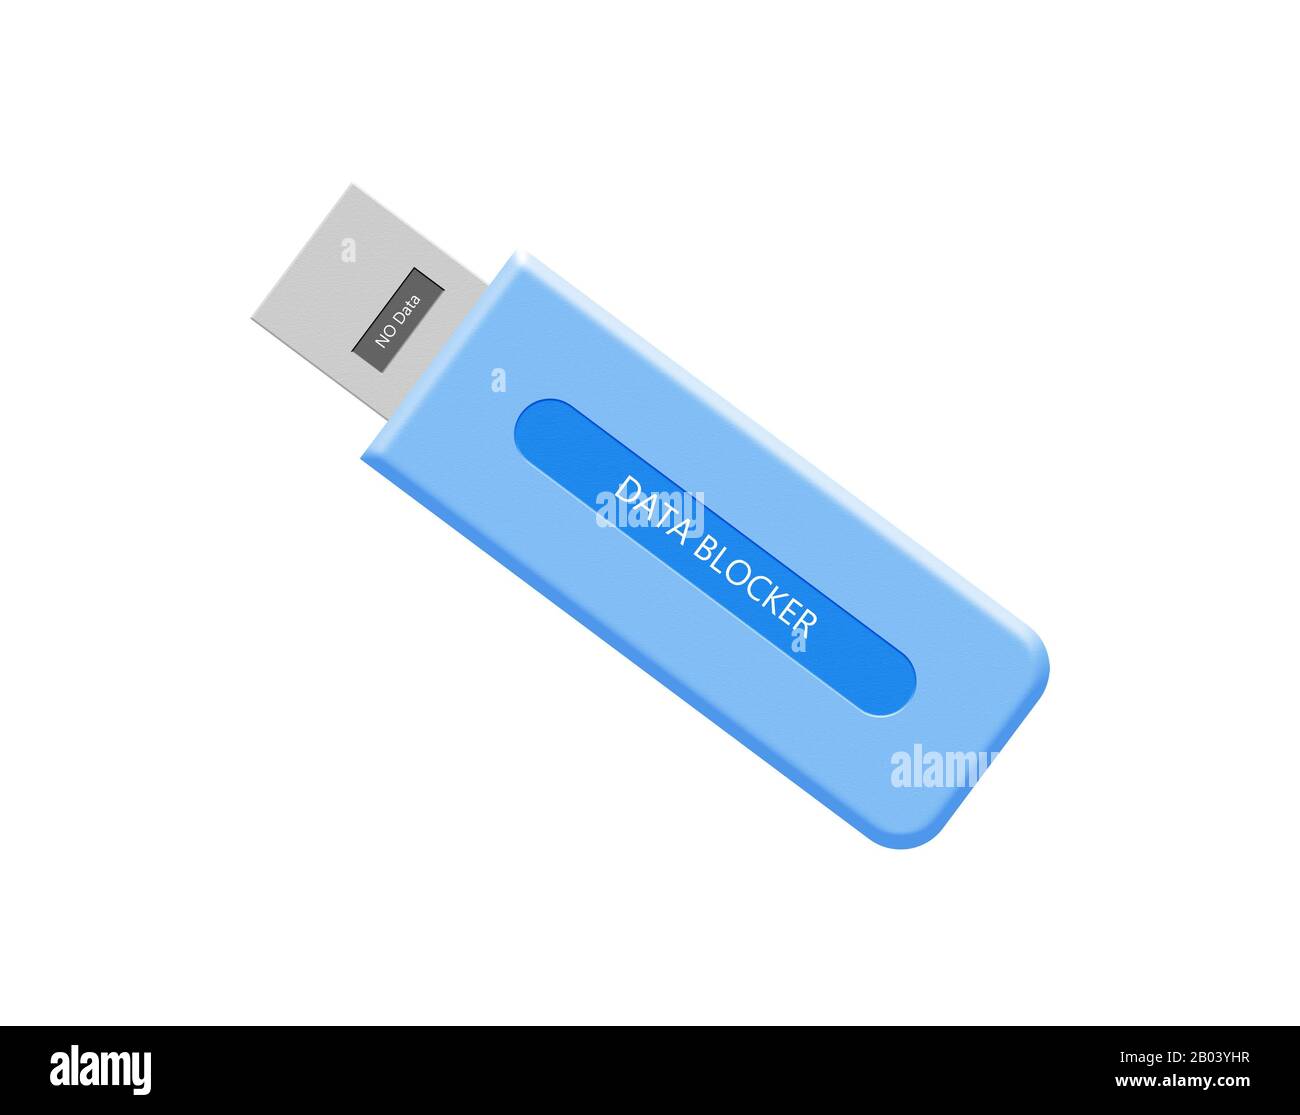 3d Illustrative example of USB data blocker or Condom used to protect from juice jacking or hacking. Stock Photo